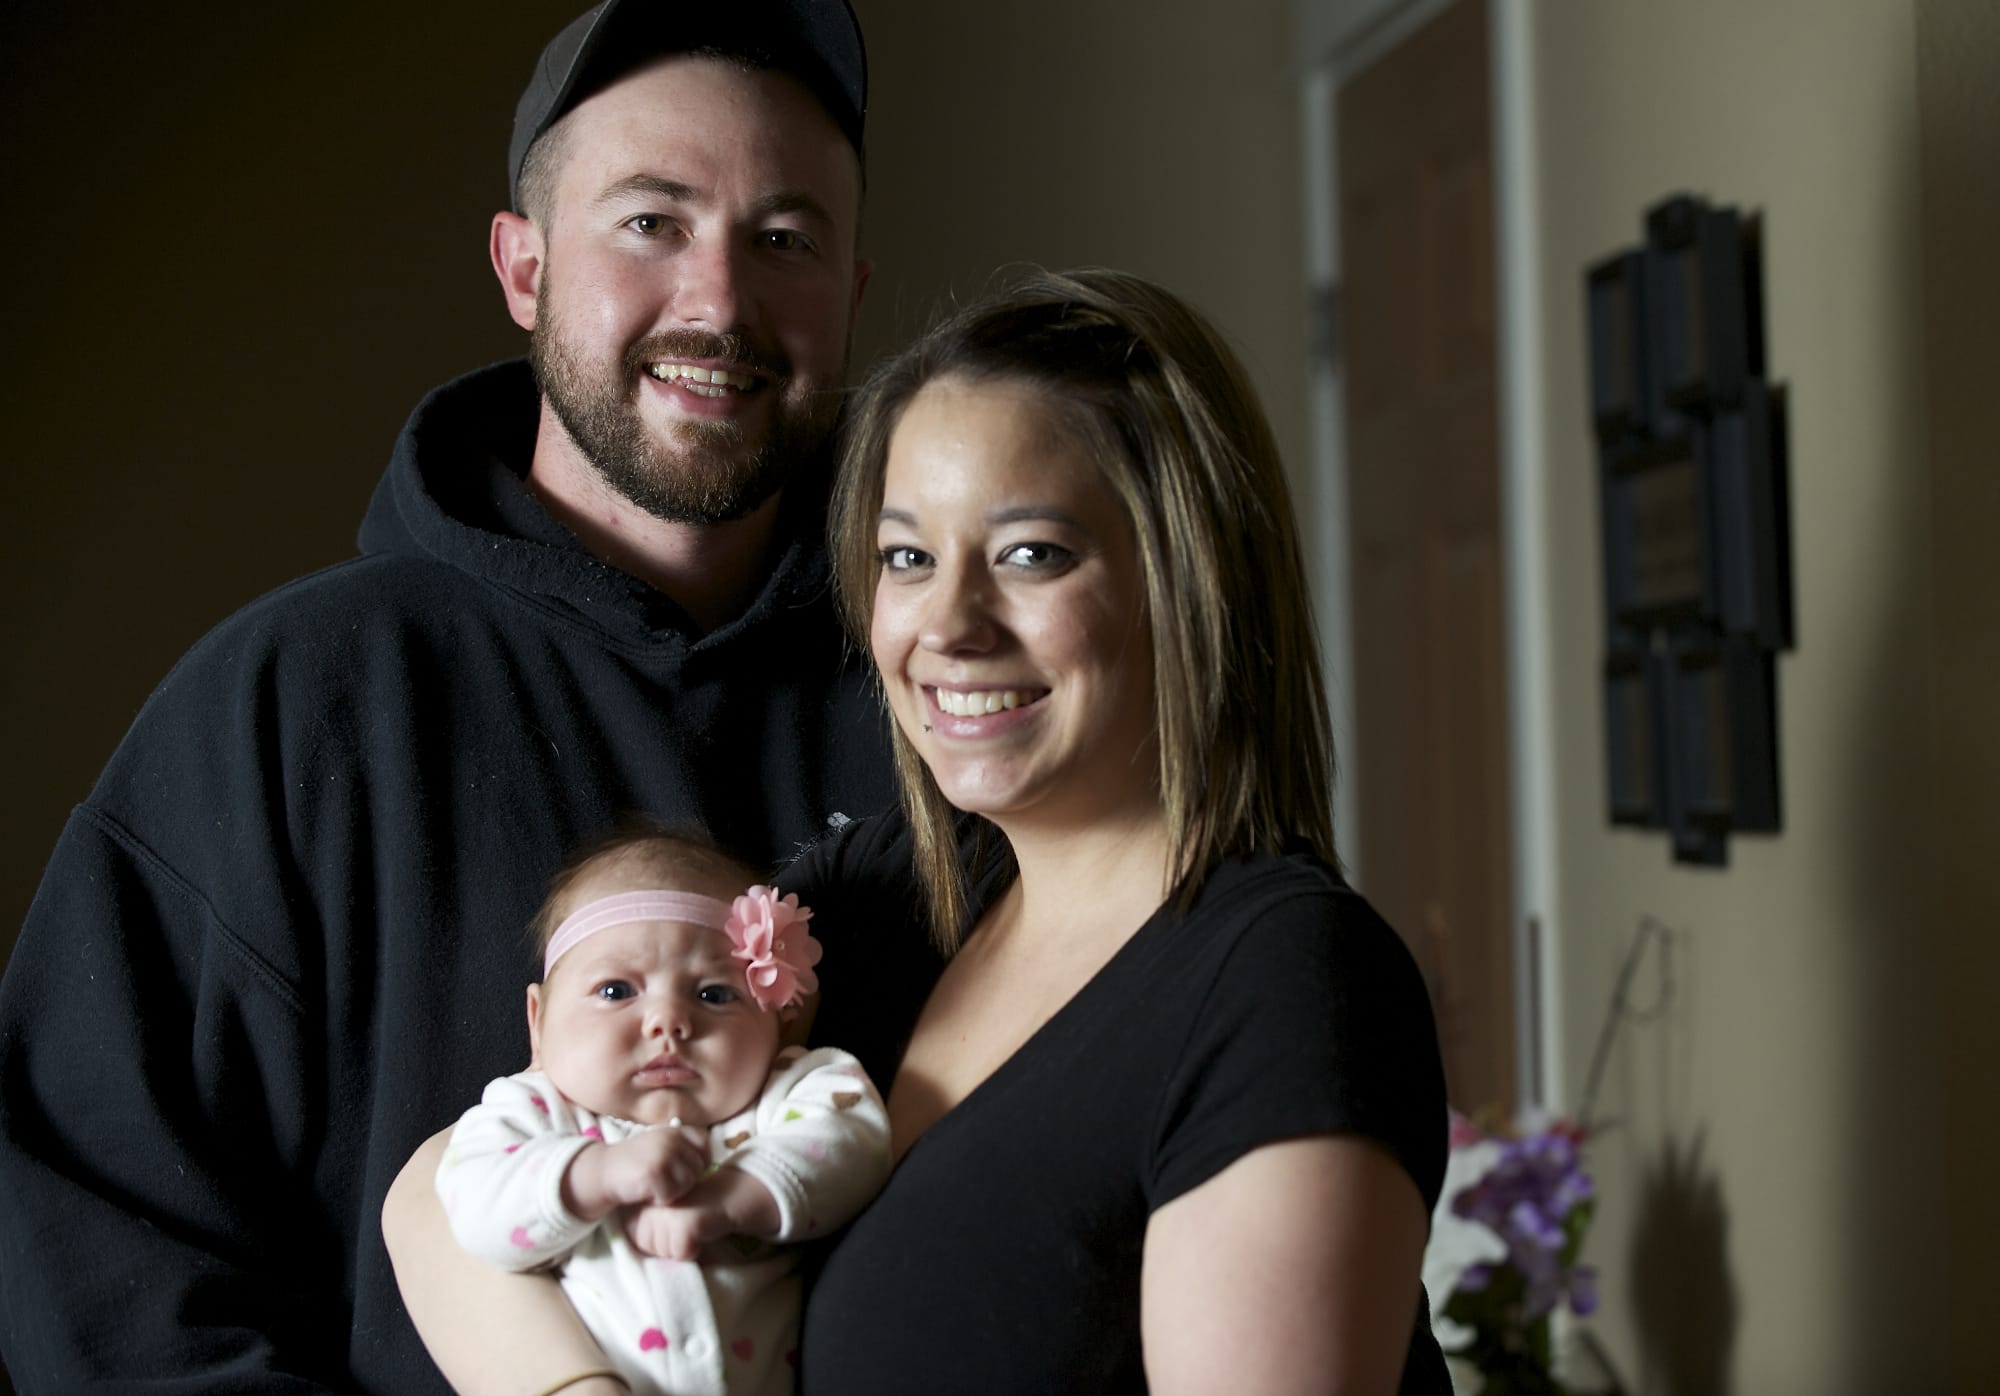 Cessiley Southard and Stephen Vroman decided to undergo genetic screening after a 19-week ultrasound showed a calcification on the baby's abdominal wall.